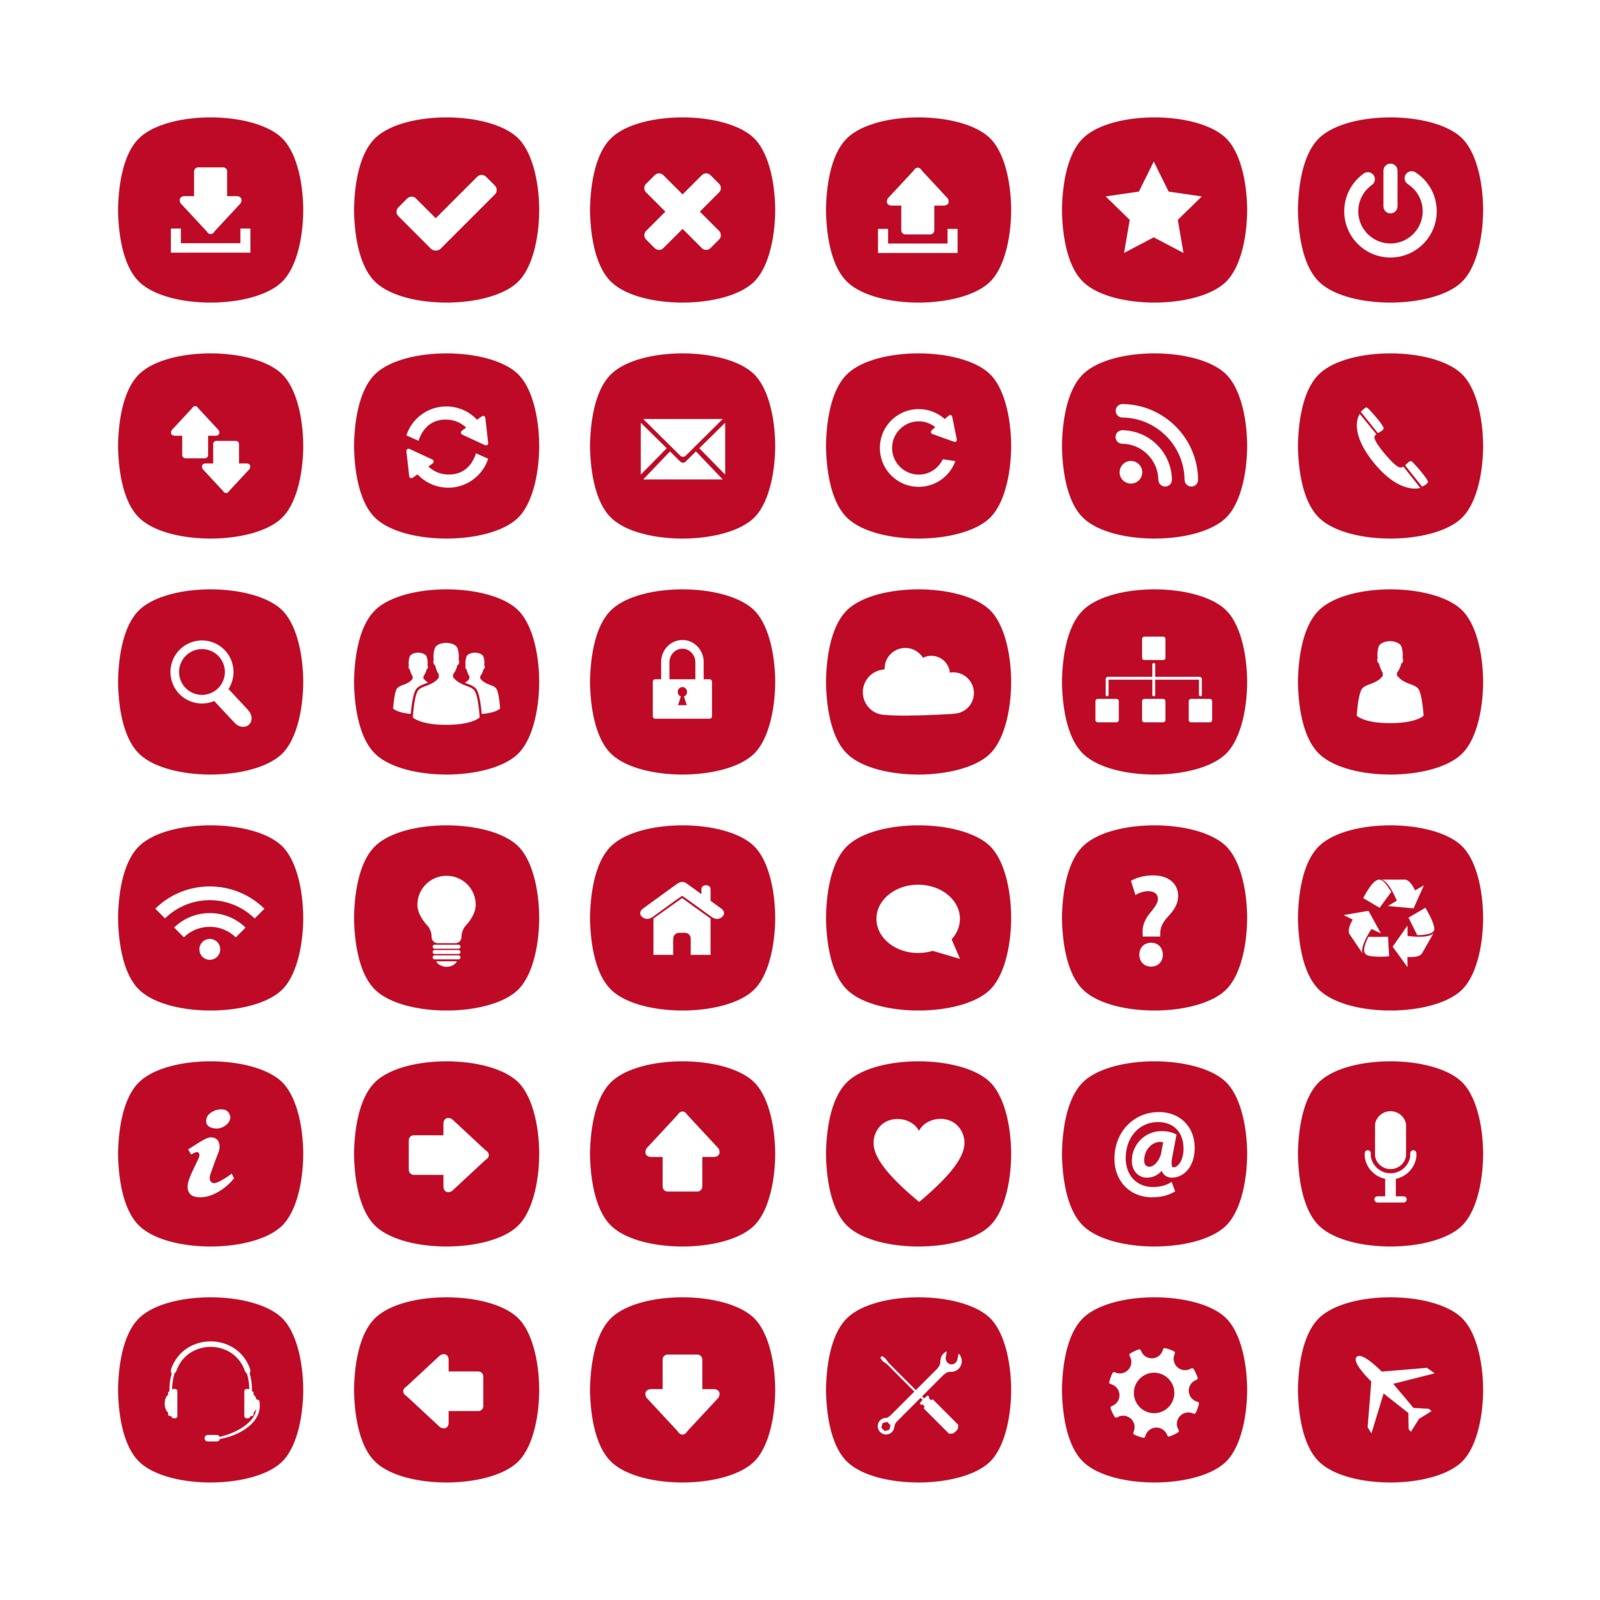 Set of red flat rounded square icons